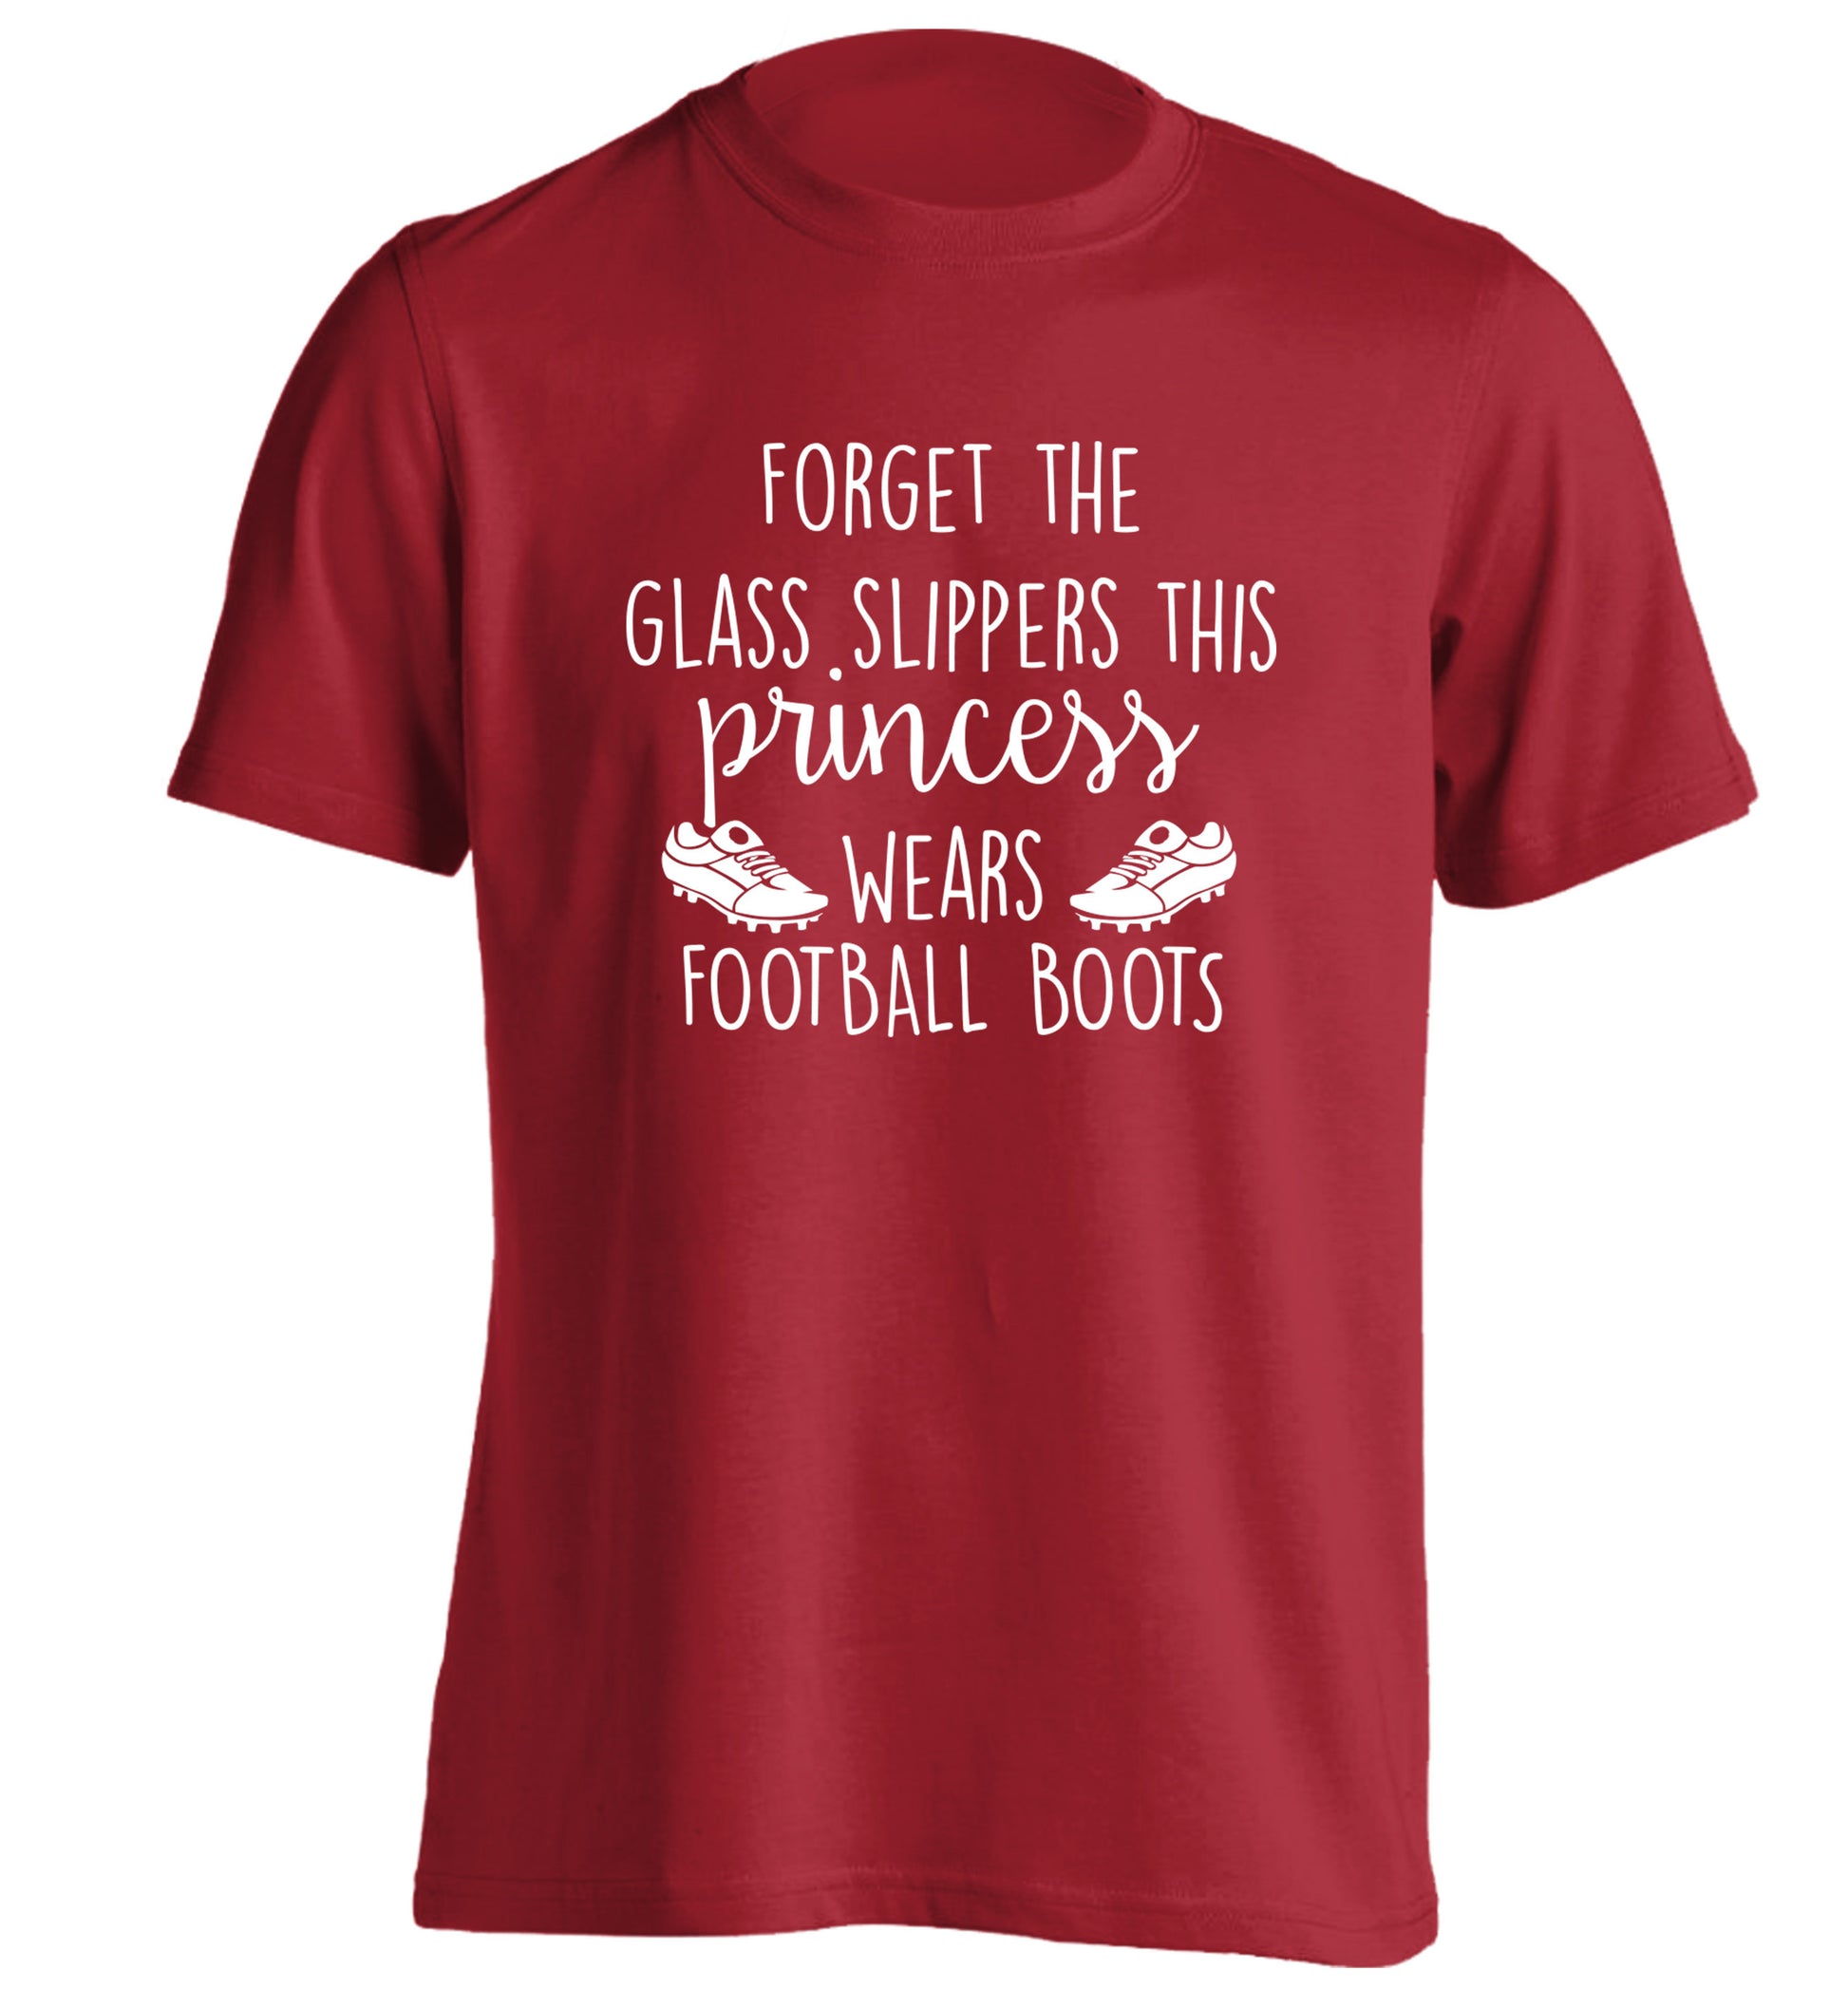 Forget the glass slippers this princess wears football boots adults unisex red Tshirt 2XL